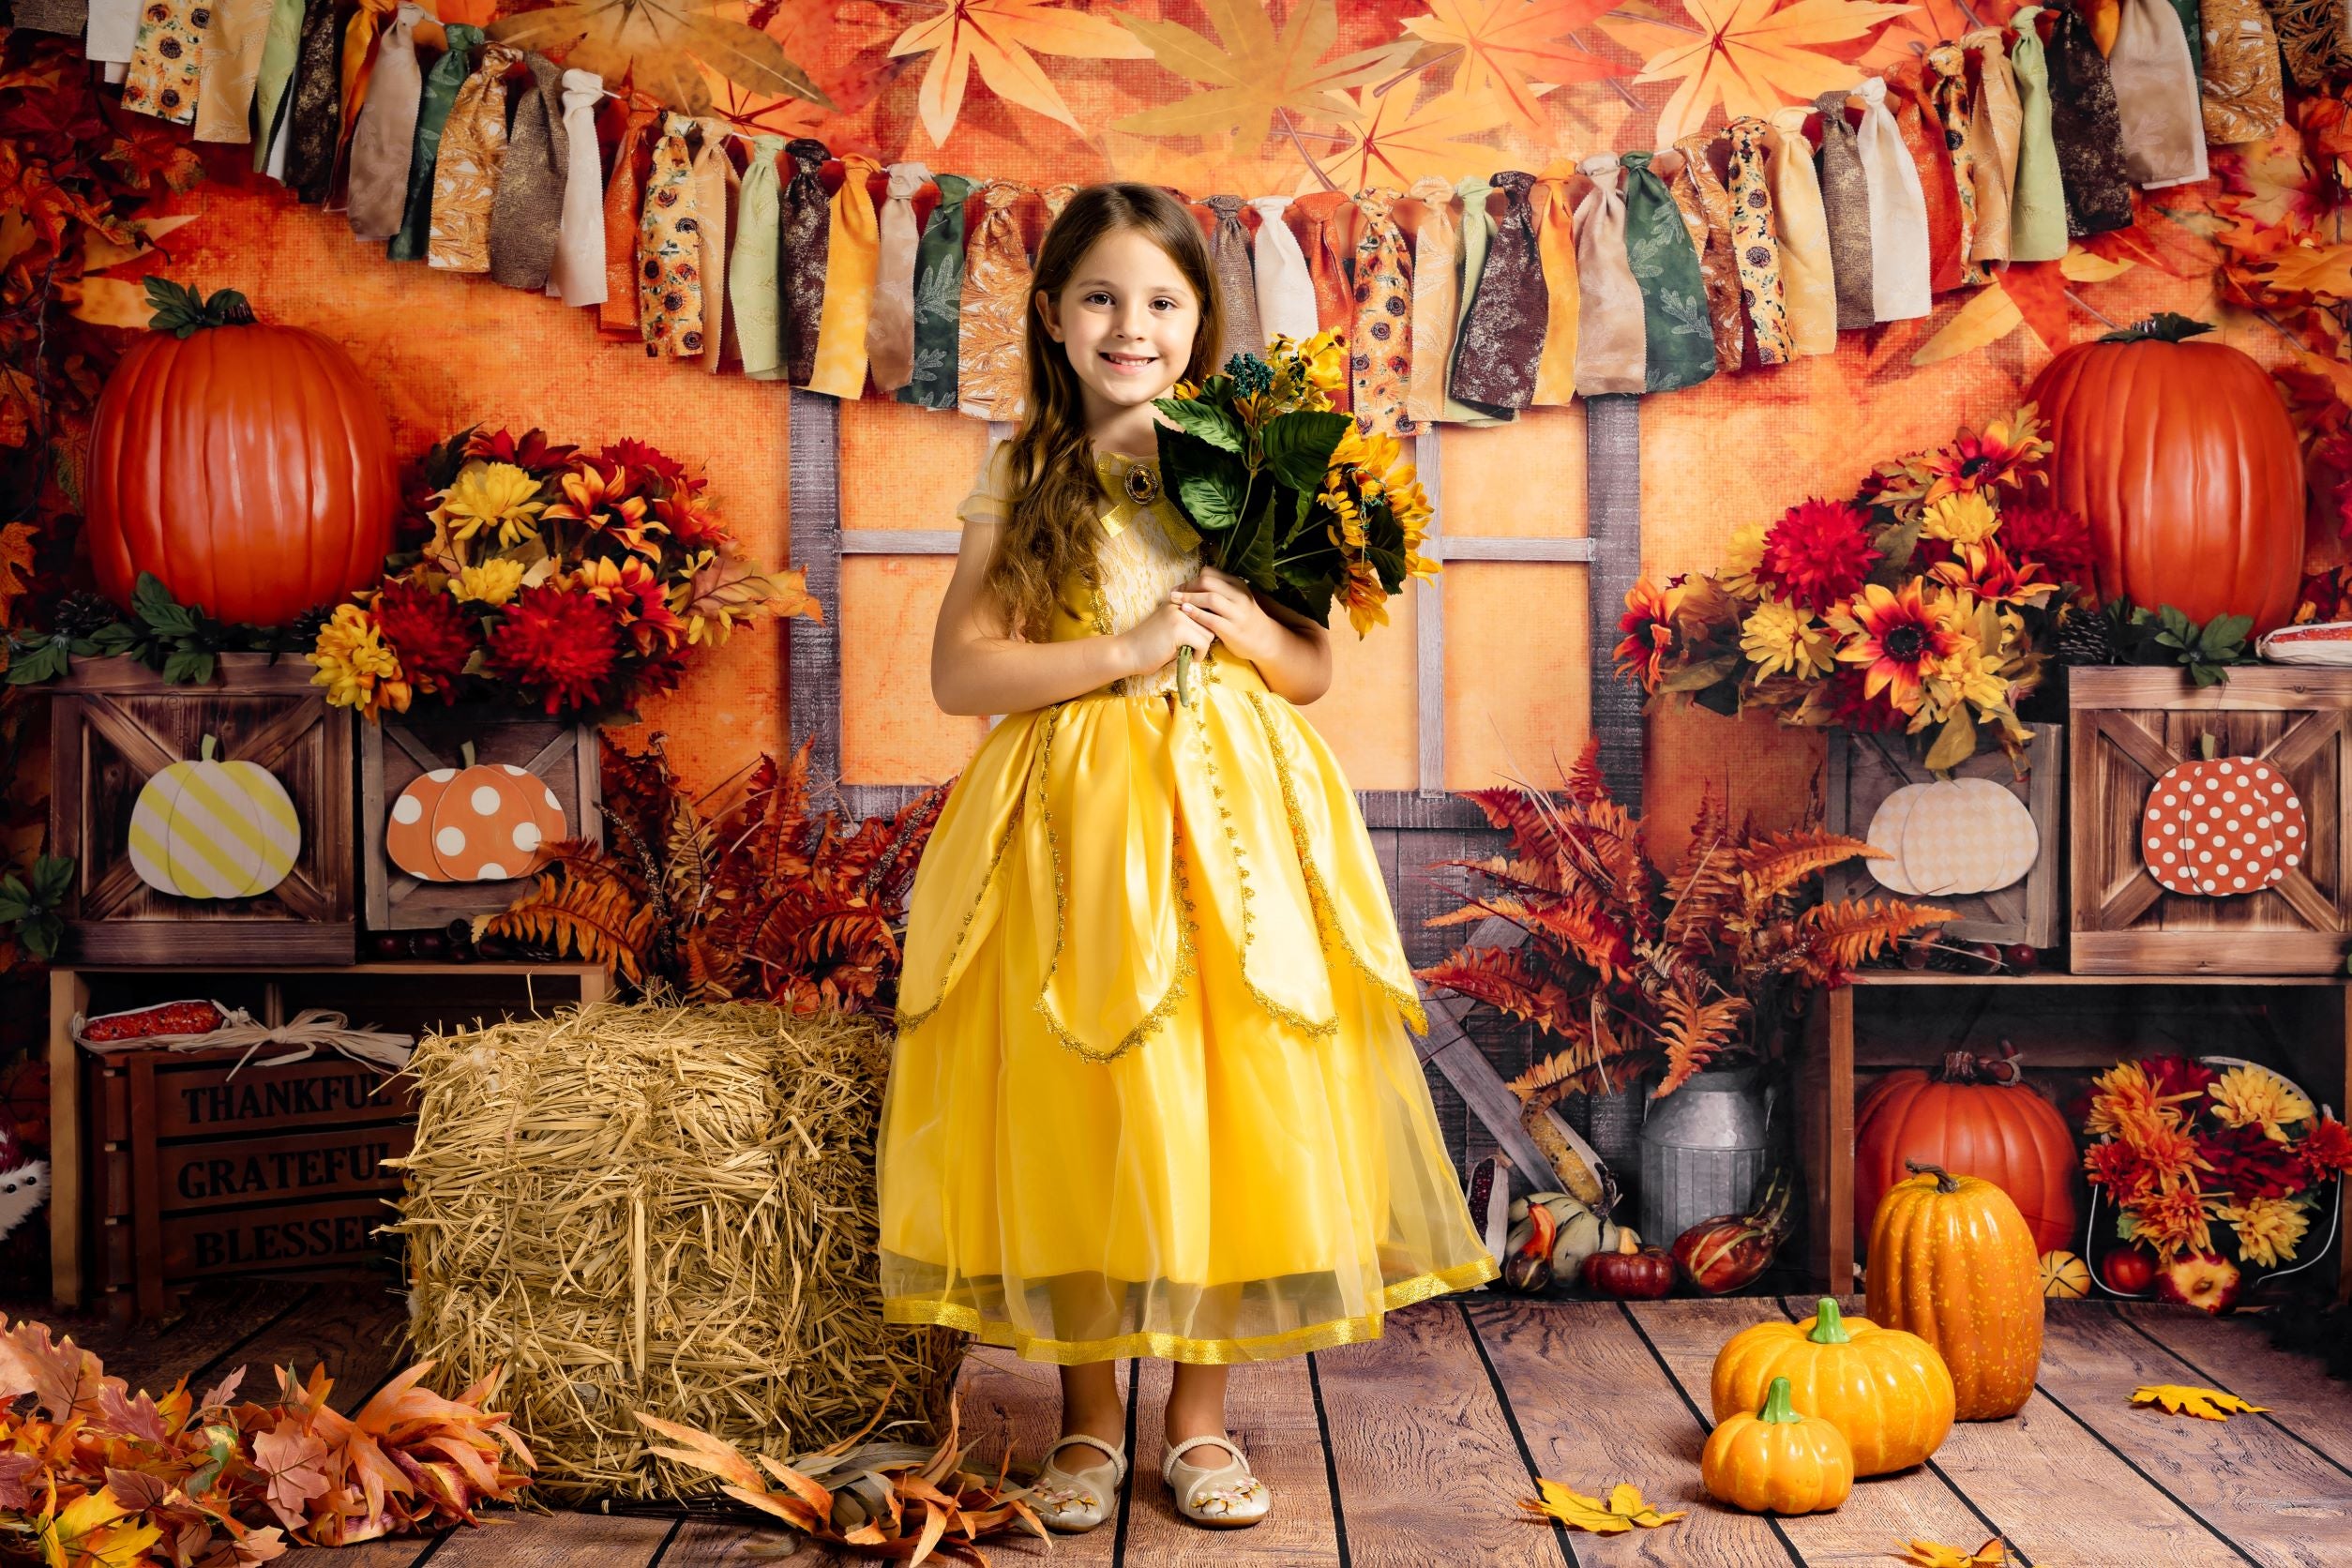 Kate Autumn Harvest Thanksgiving Backdrop for Photography - Kate Backdrop